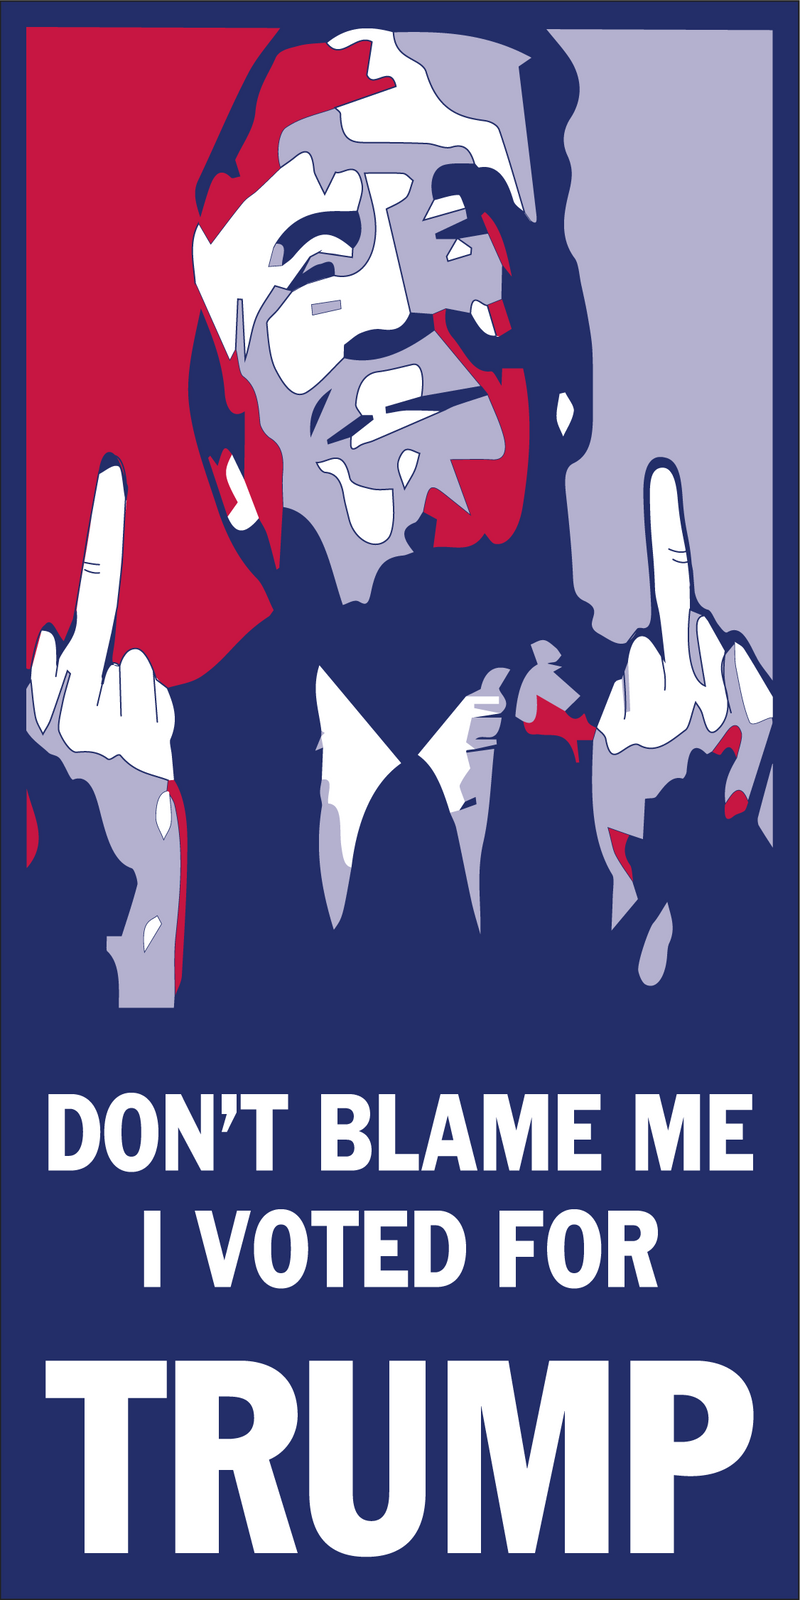 DON'T BLAME ME I VOTED FOR TRUMP MIDDLE FINGERS Bumper Sticker Made in USA American Flag